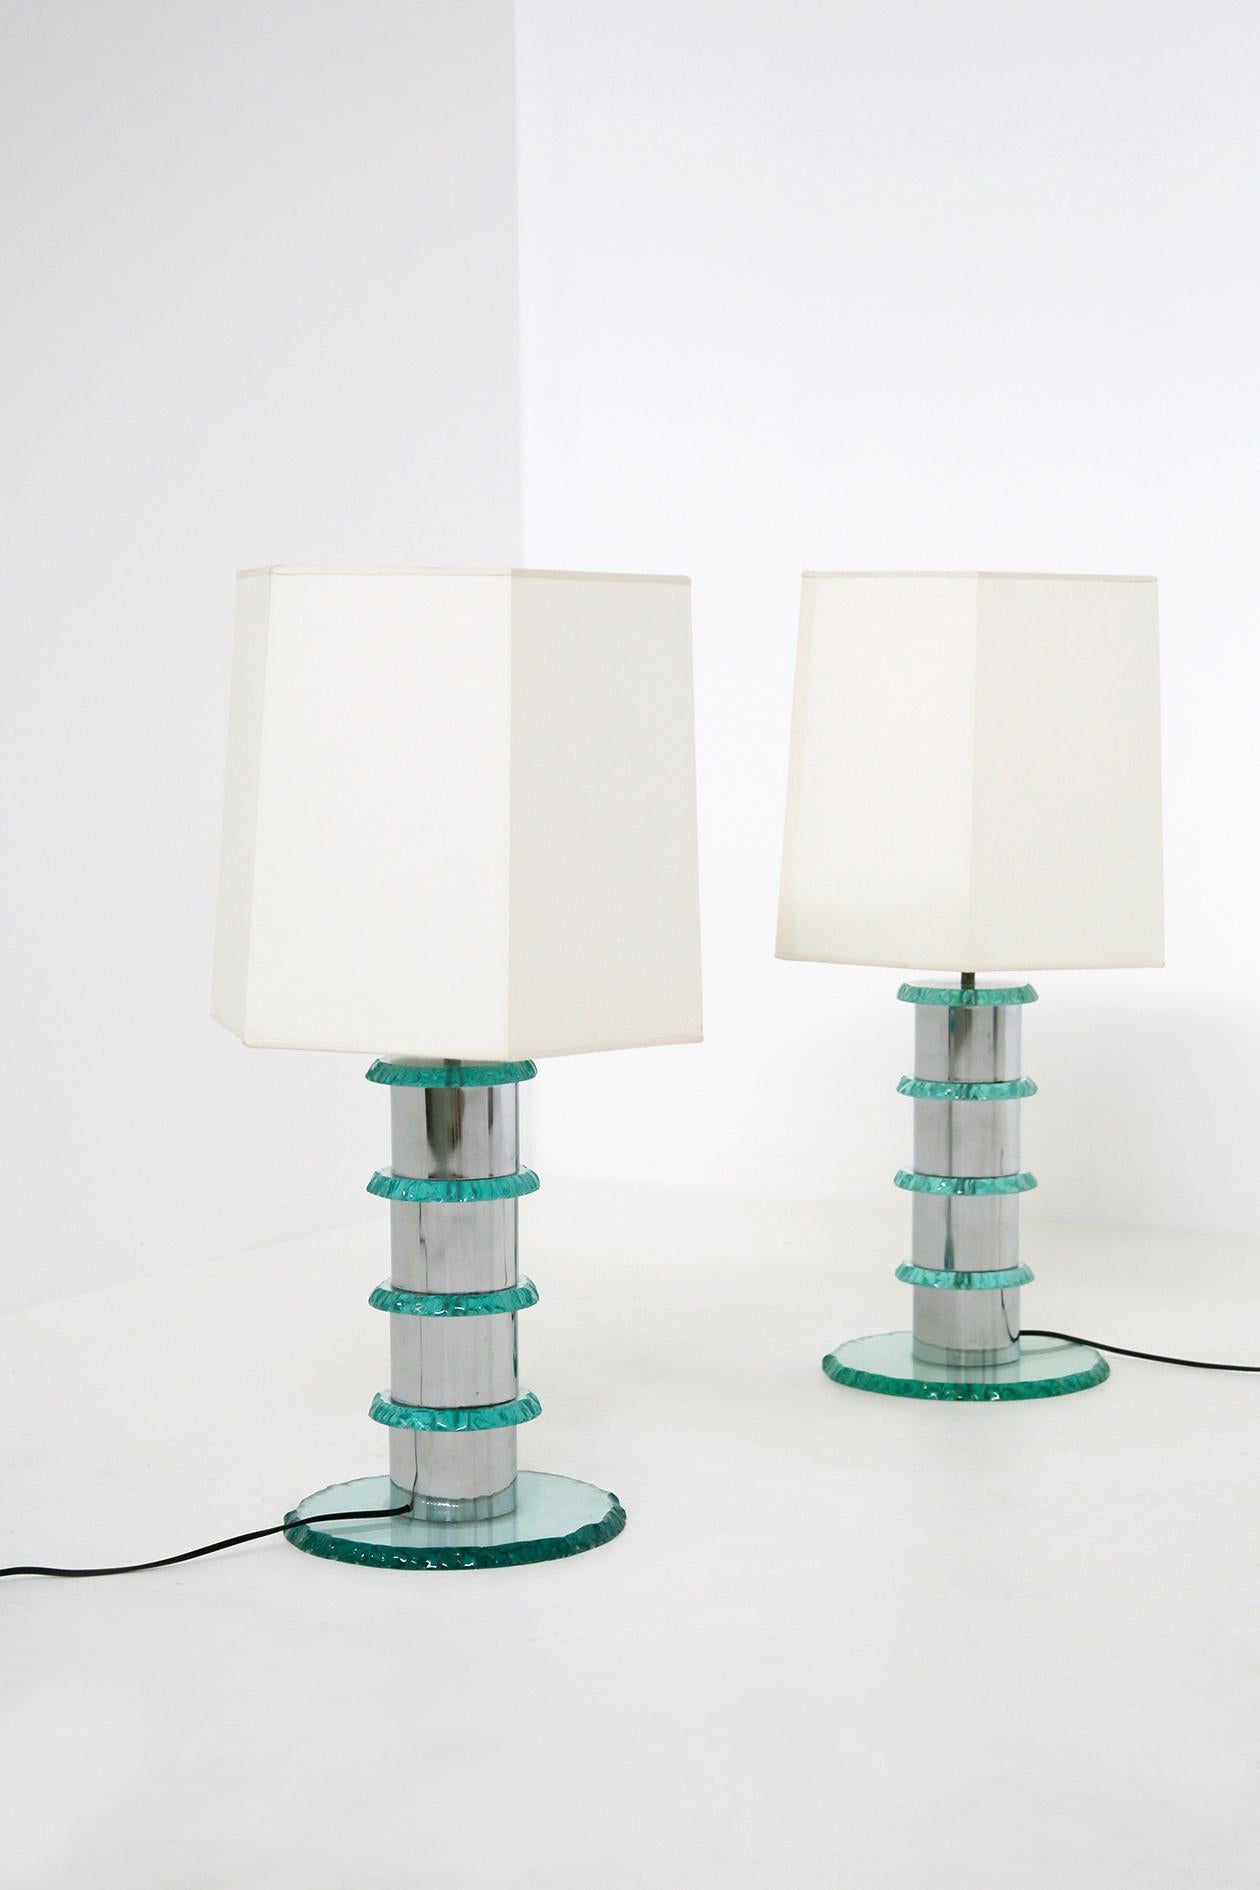 Elegant pair of contemporary Italian lamps. The lamps are made in Italy by master glassmakers. The lamp is handmade. The stem of the lamp is made of chrome plated steel and at each intersection we notice hammered glass circles applied. As a support